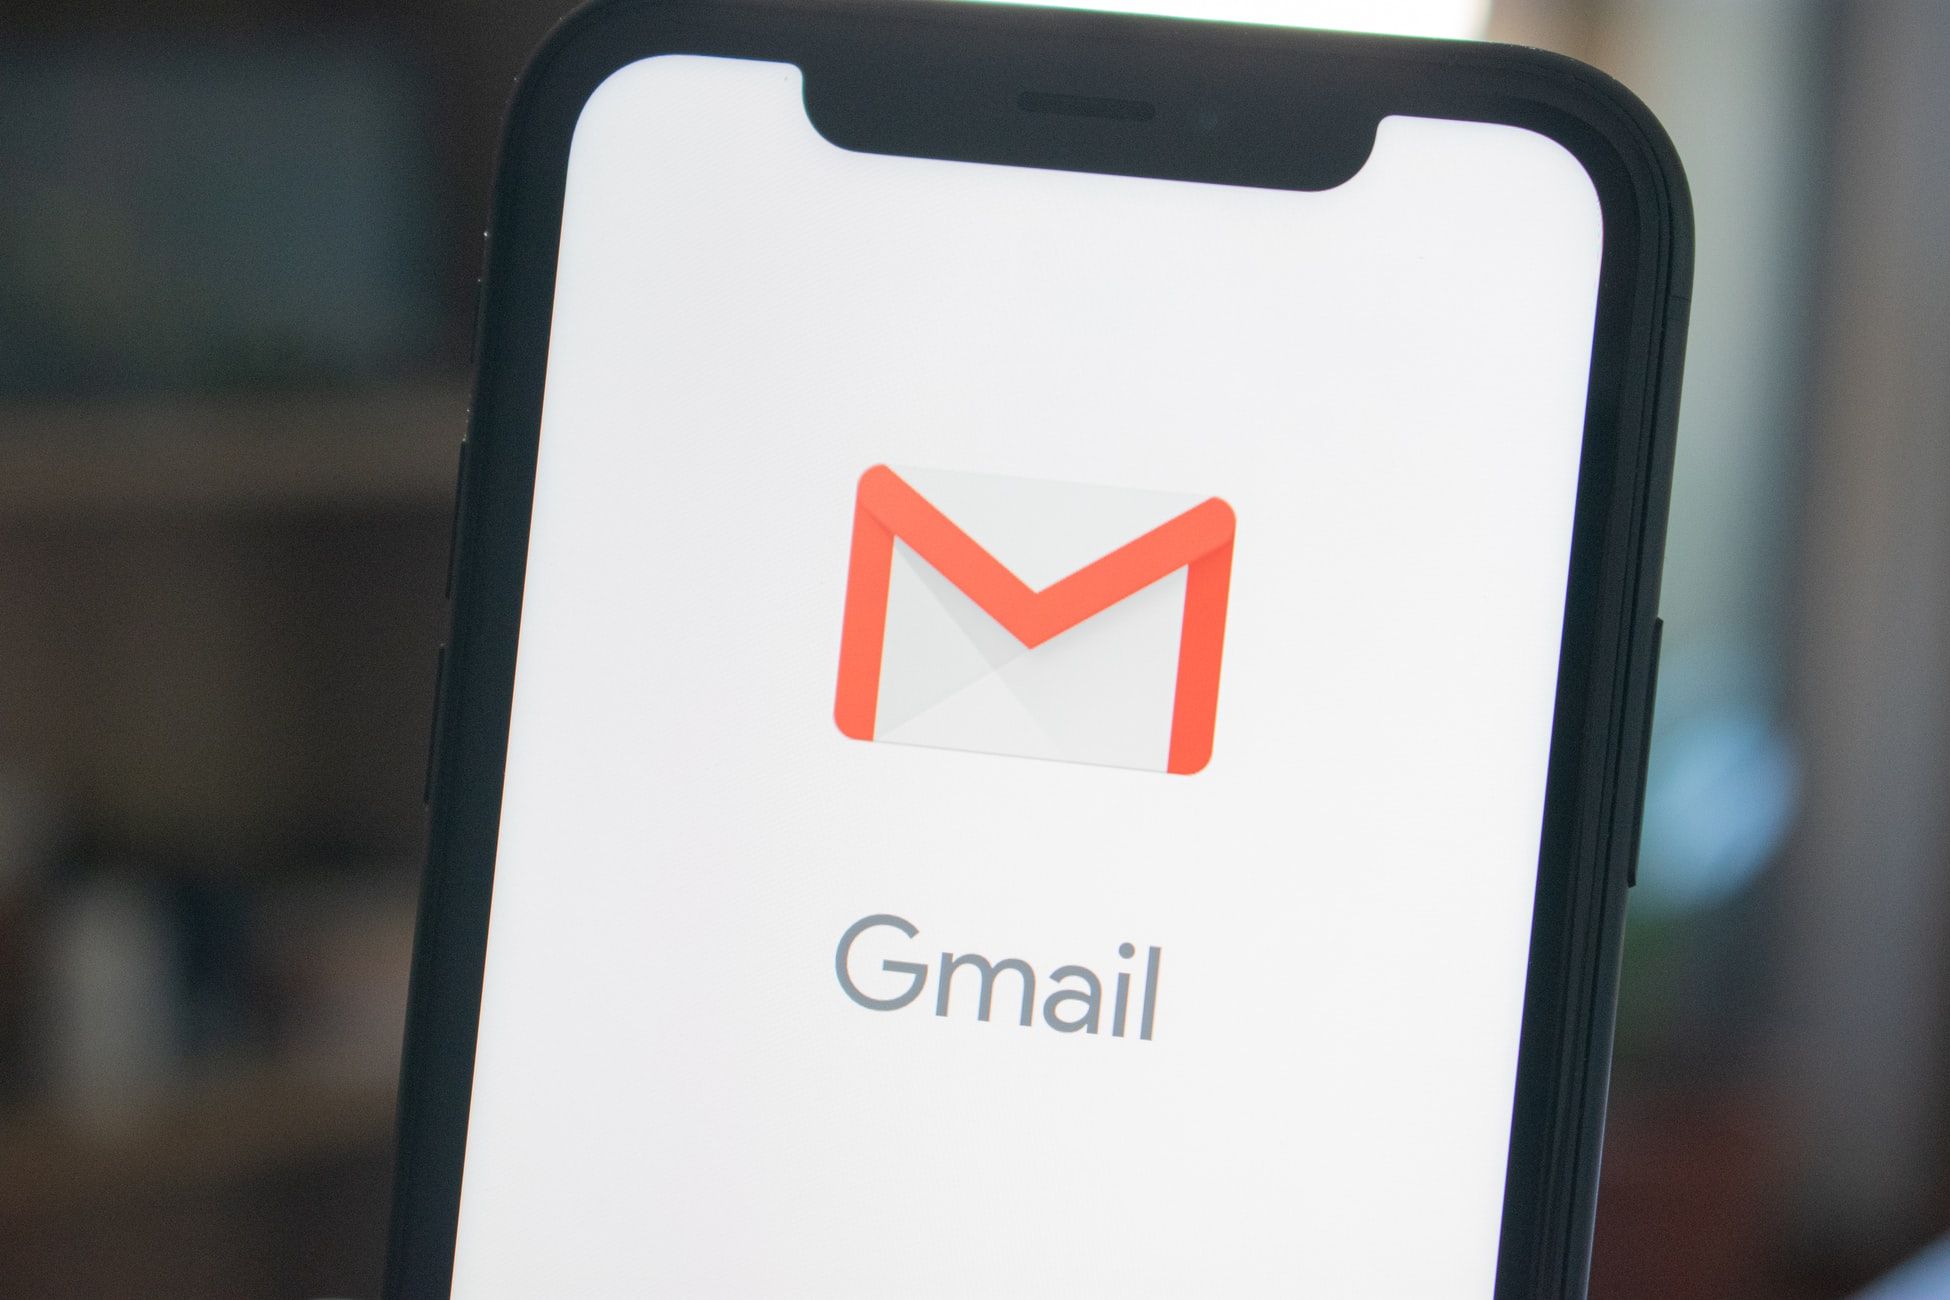 Gmail's gift to you: Instant package updates in your inbox